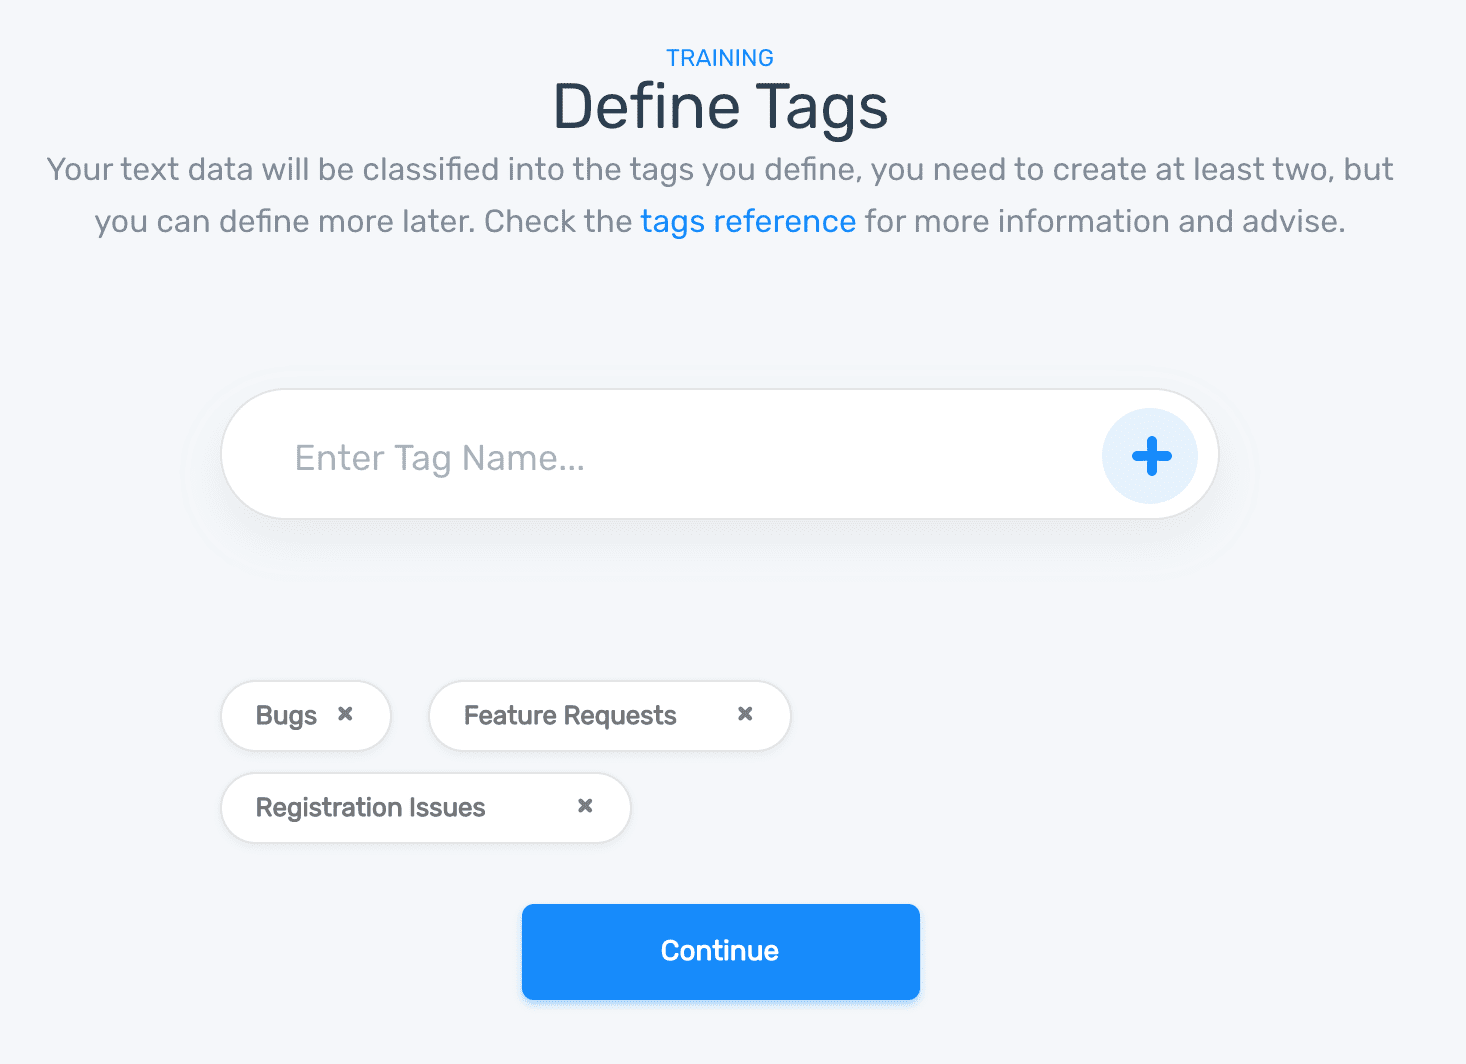 Step 3: Define tags that you want to use to tag customer service data